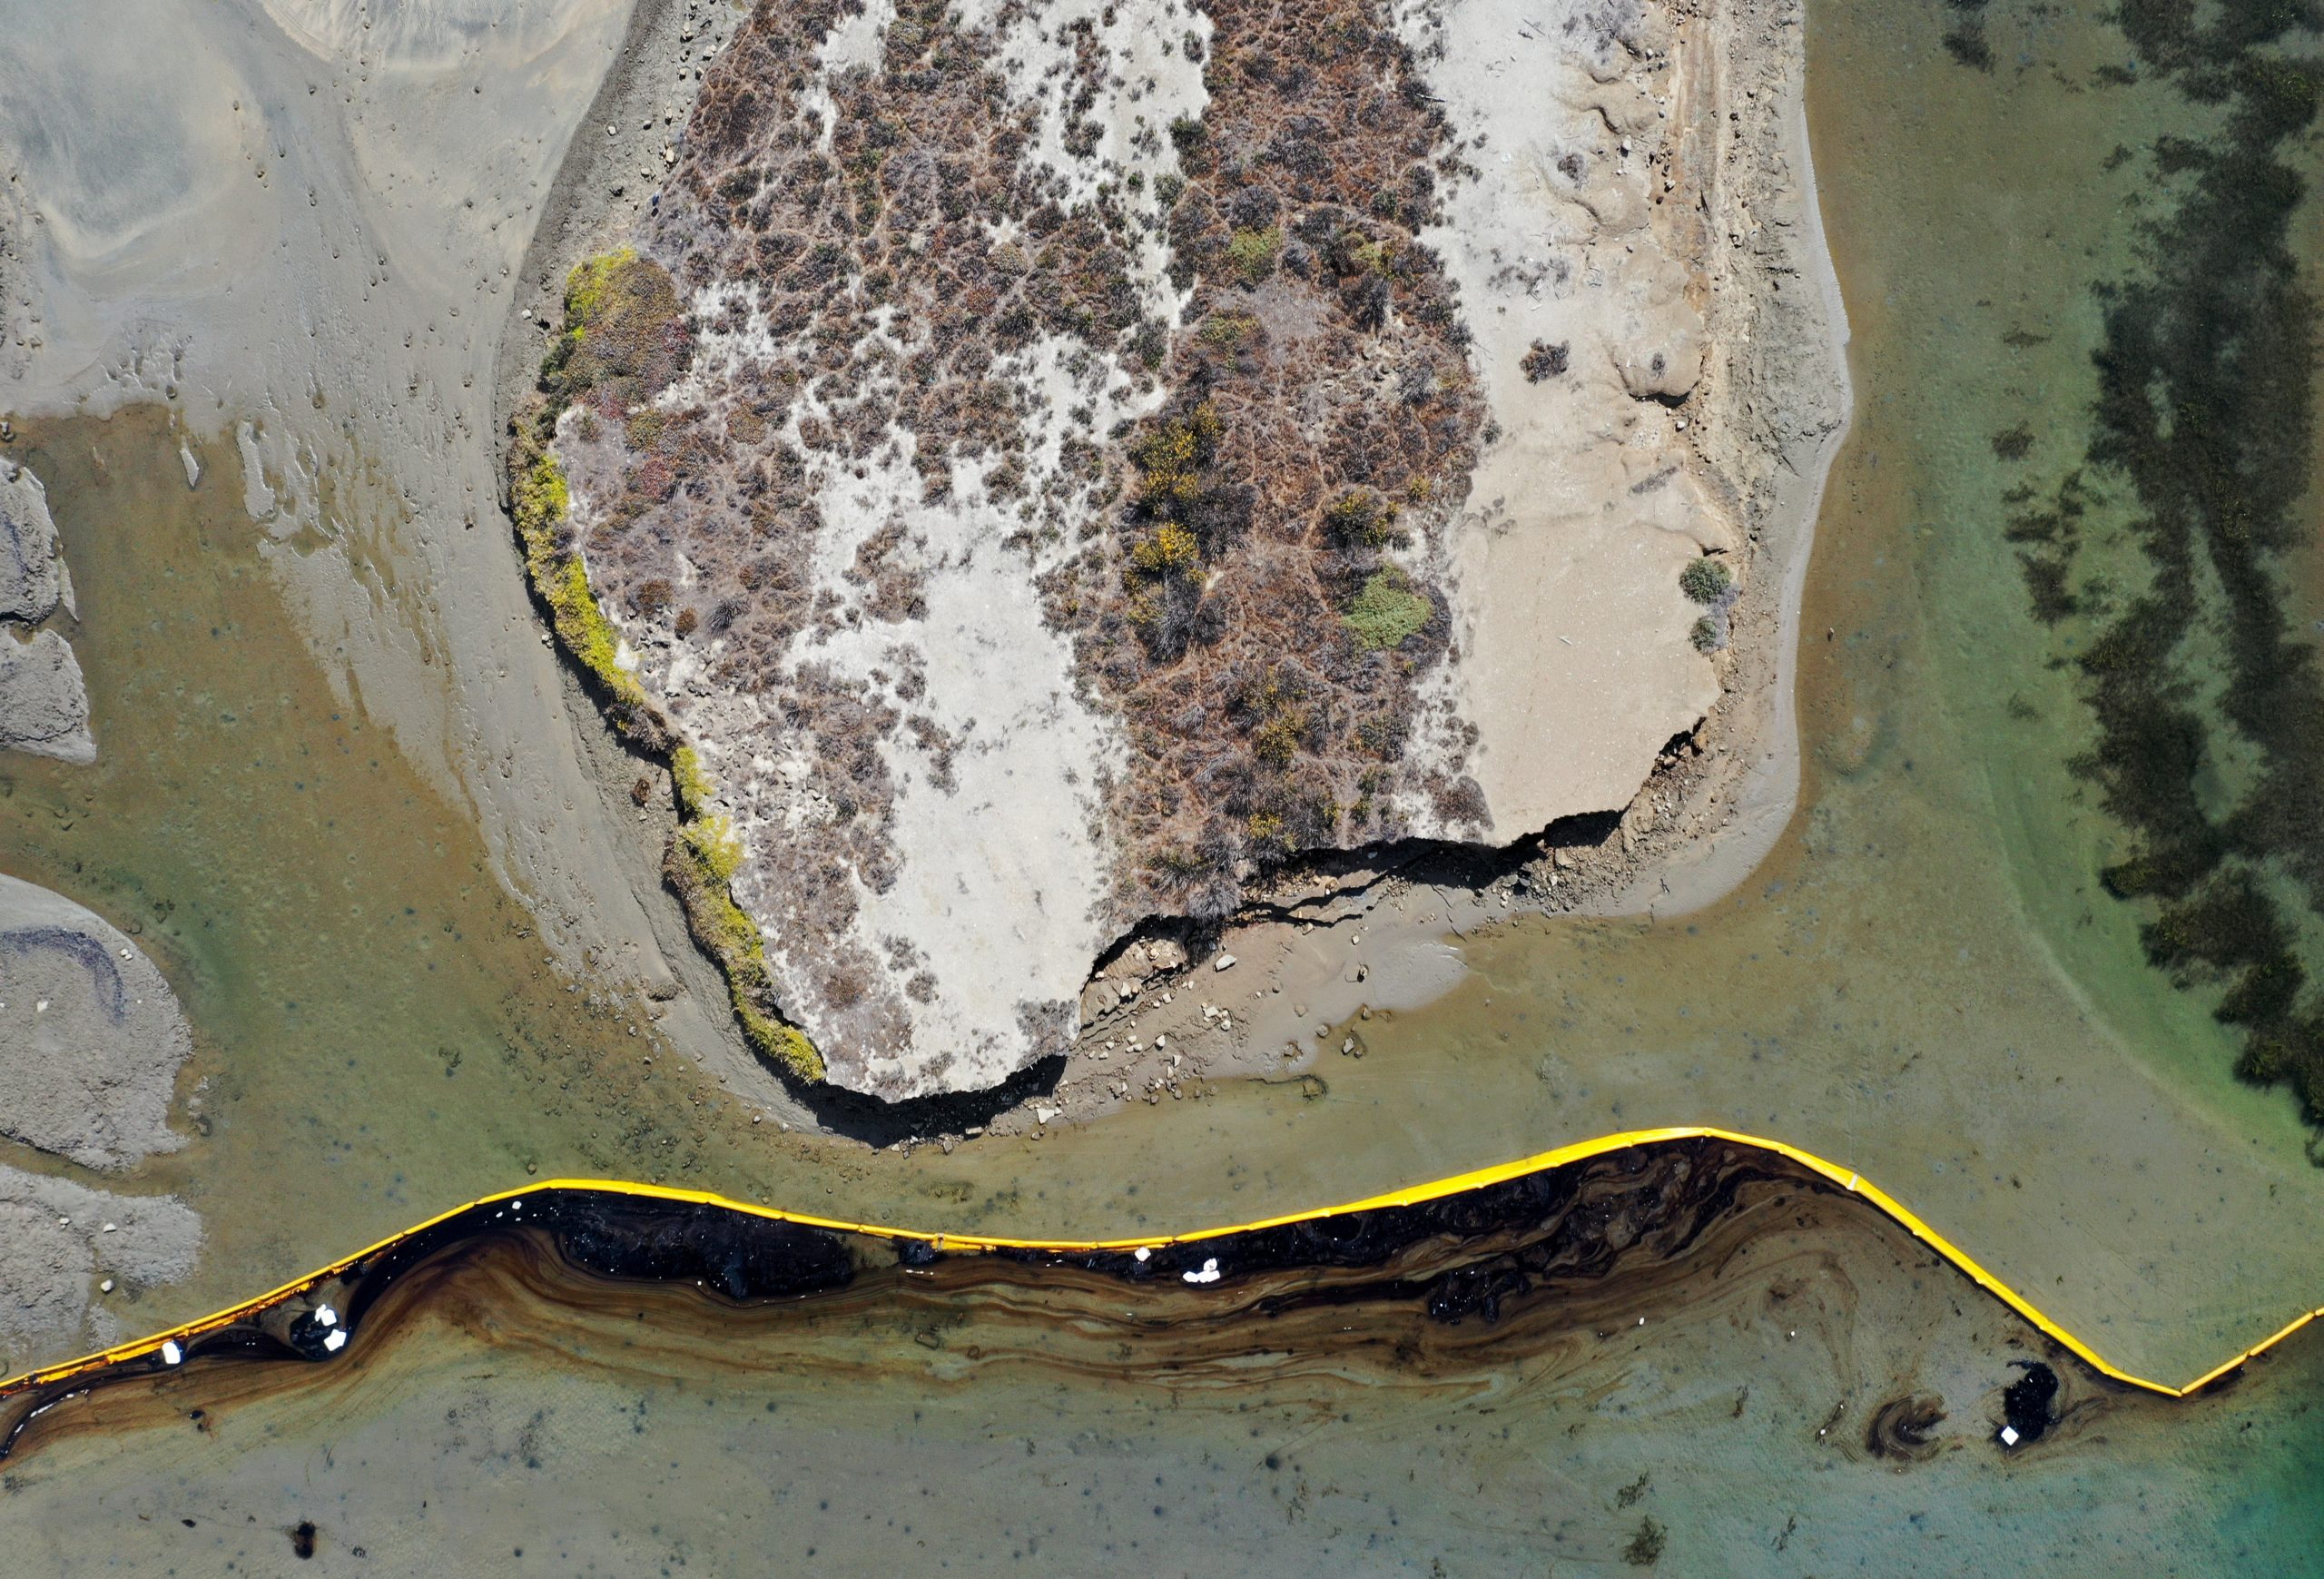 A boom contains oil-contaminated water in the area of the Talbert Marsh wetlands. (Photo: Mario Tama/Getty Images, Getty Images)